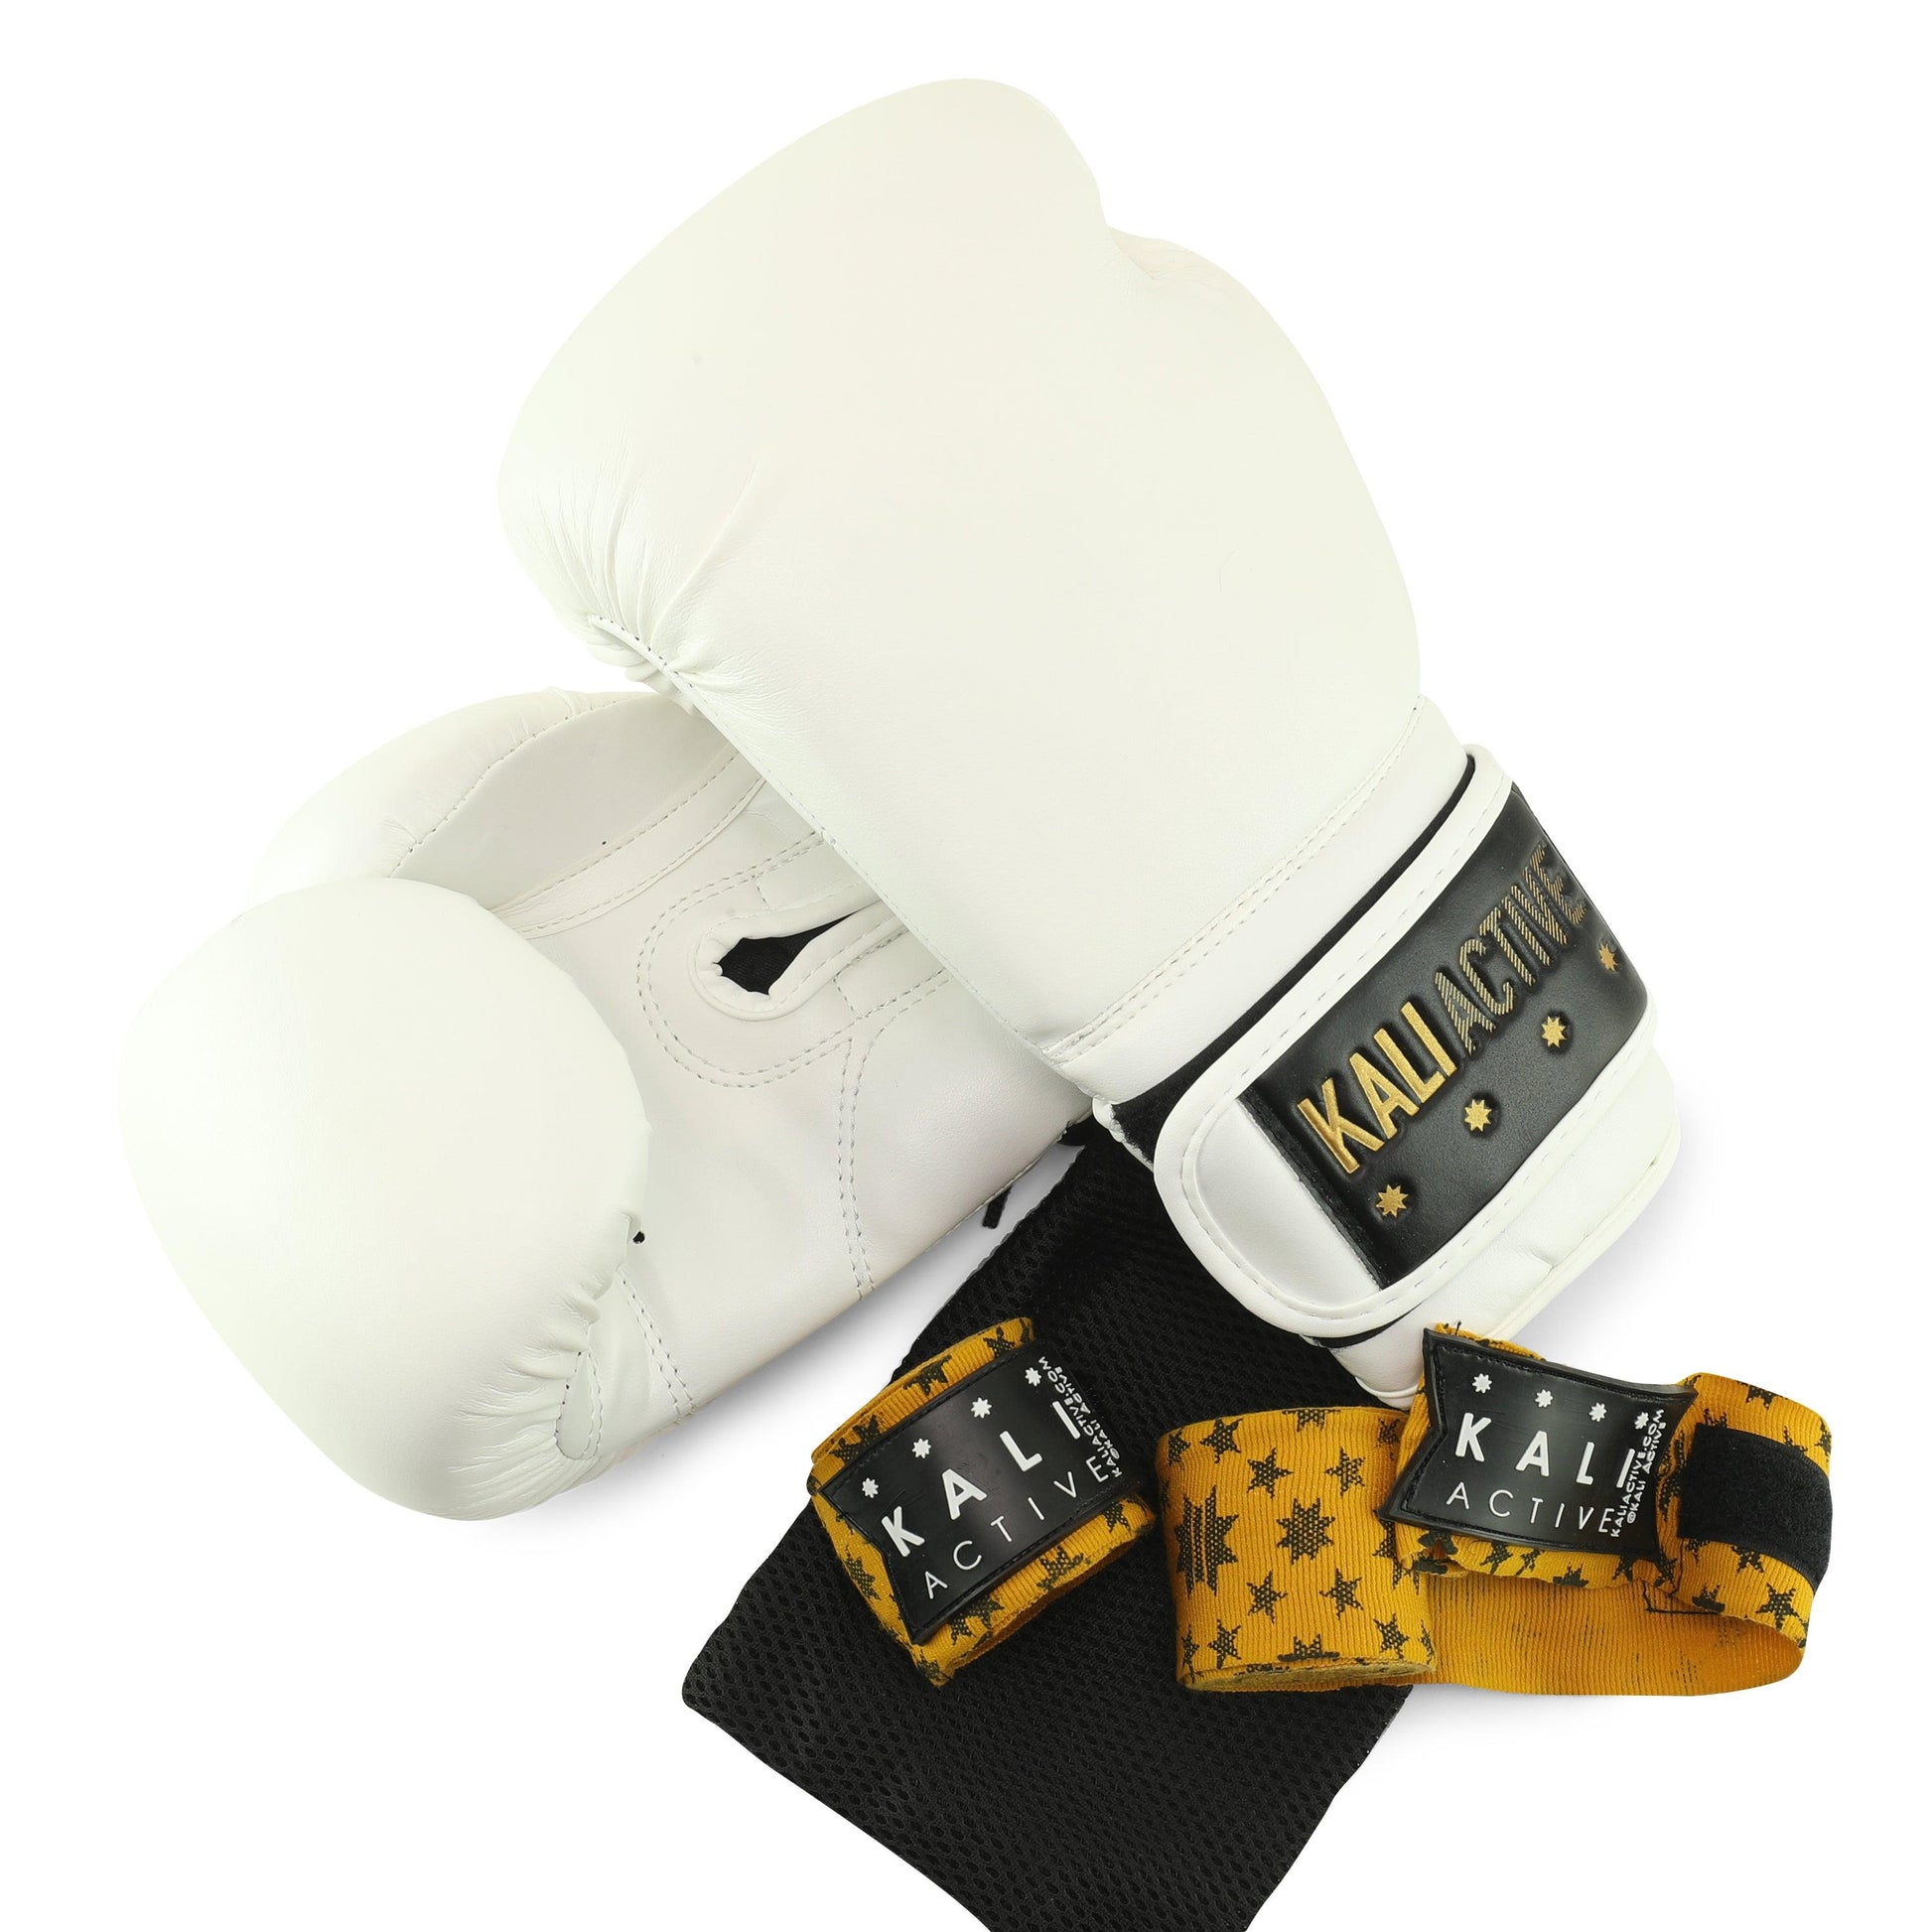 Boxing Wrist Wraps (14 photos) - Photography and Web Design - Los Angeles, US based Shopify Experts Revo Designs